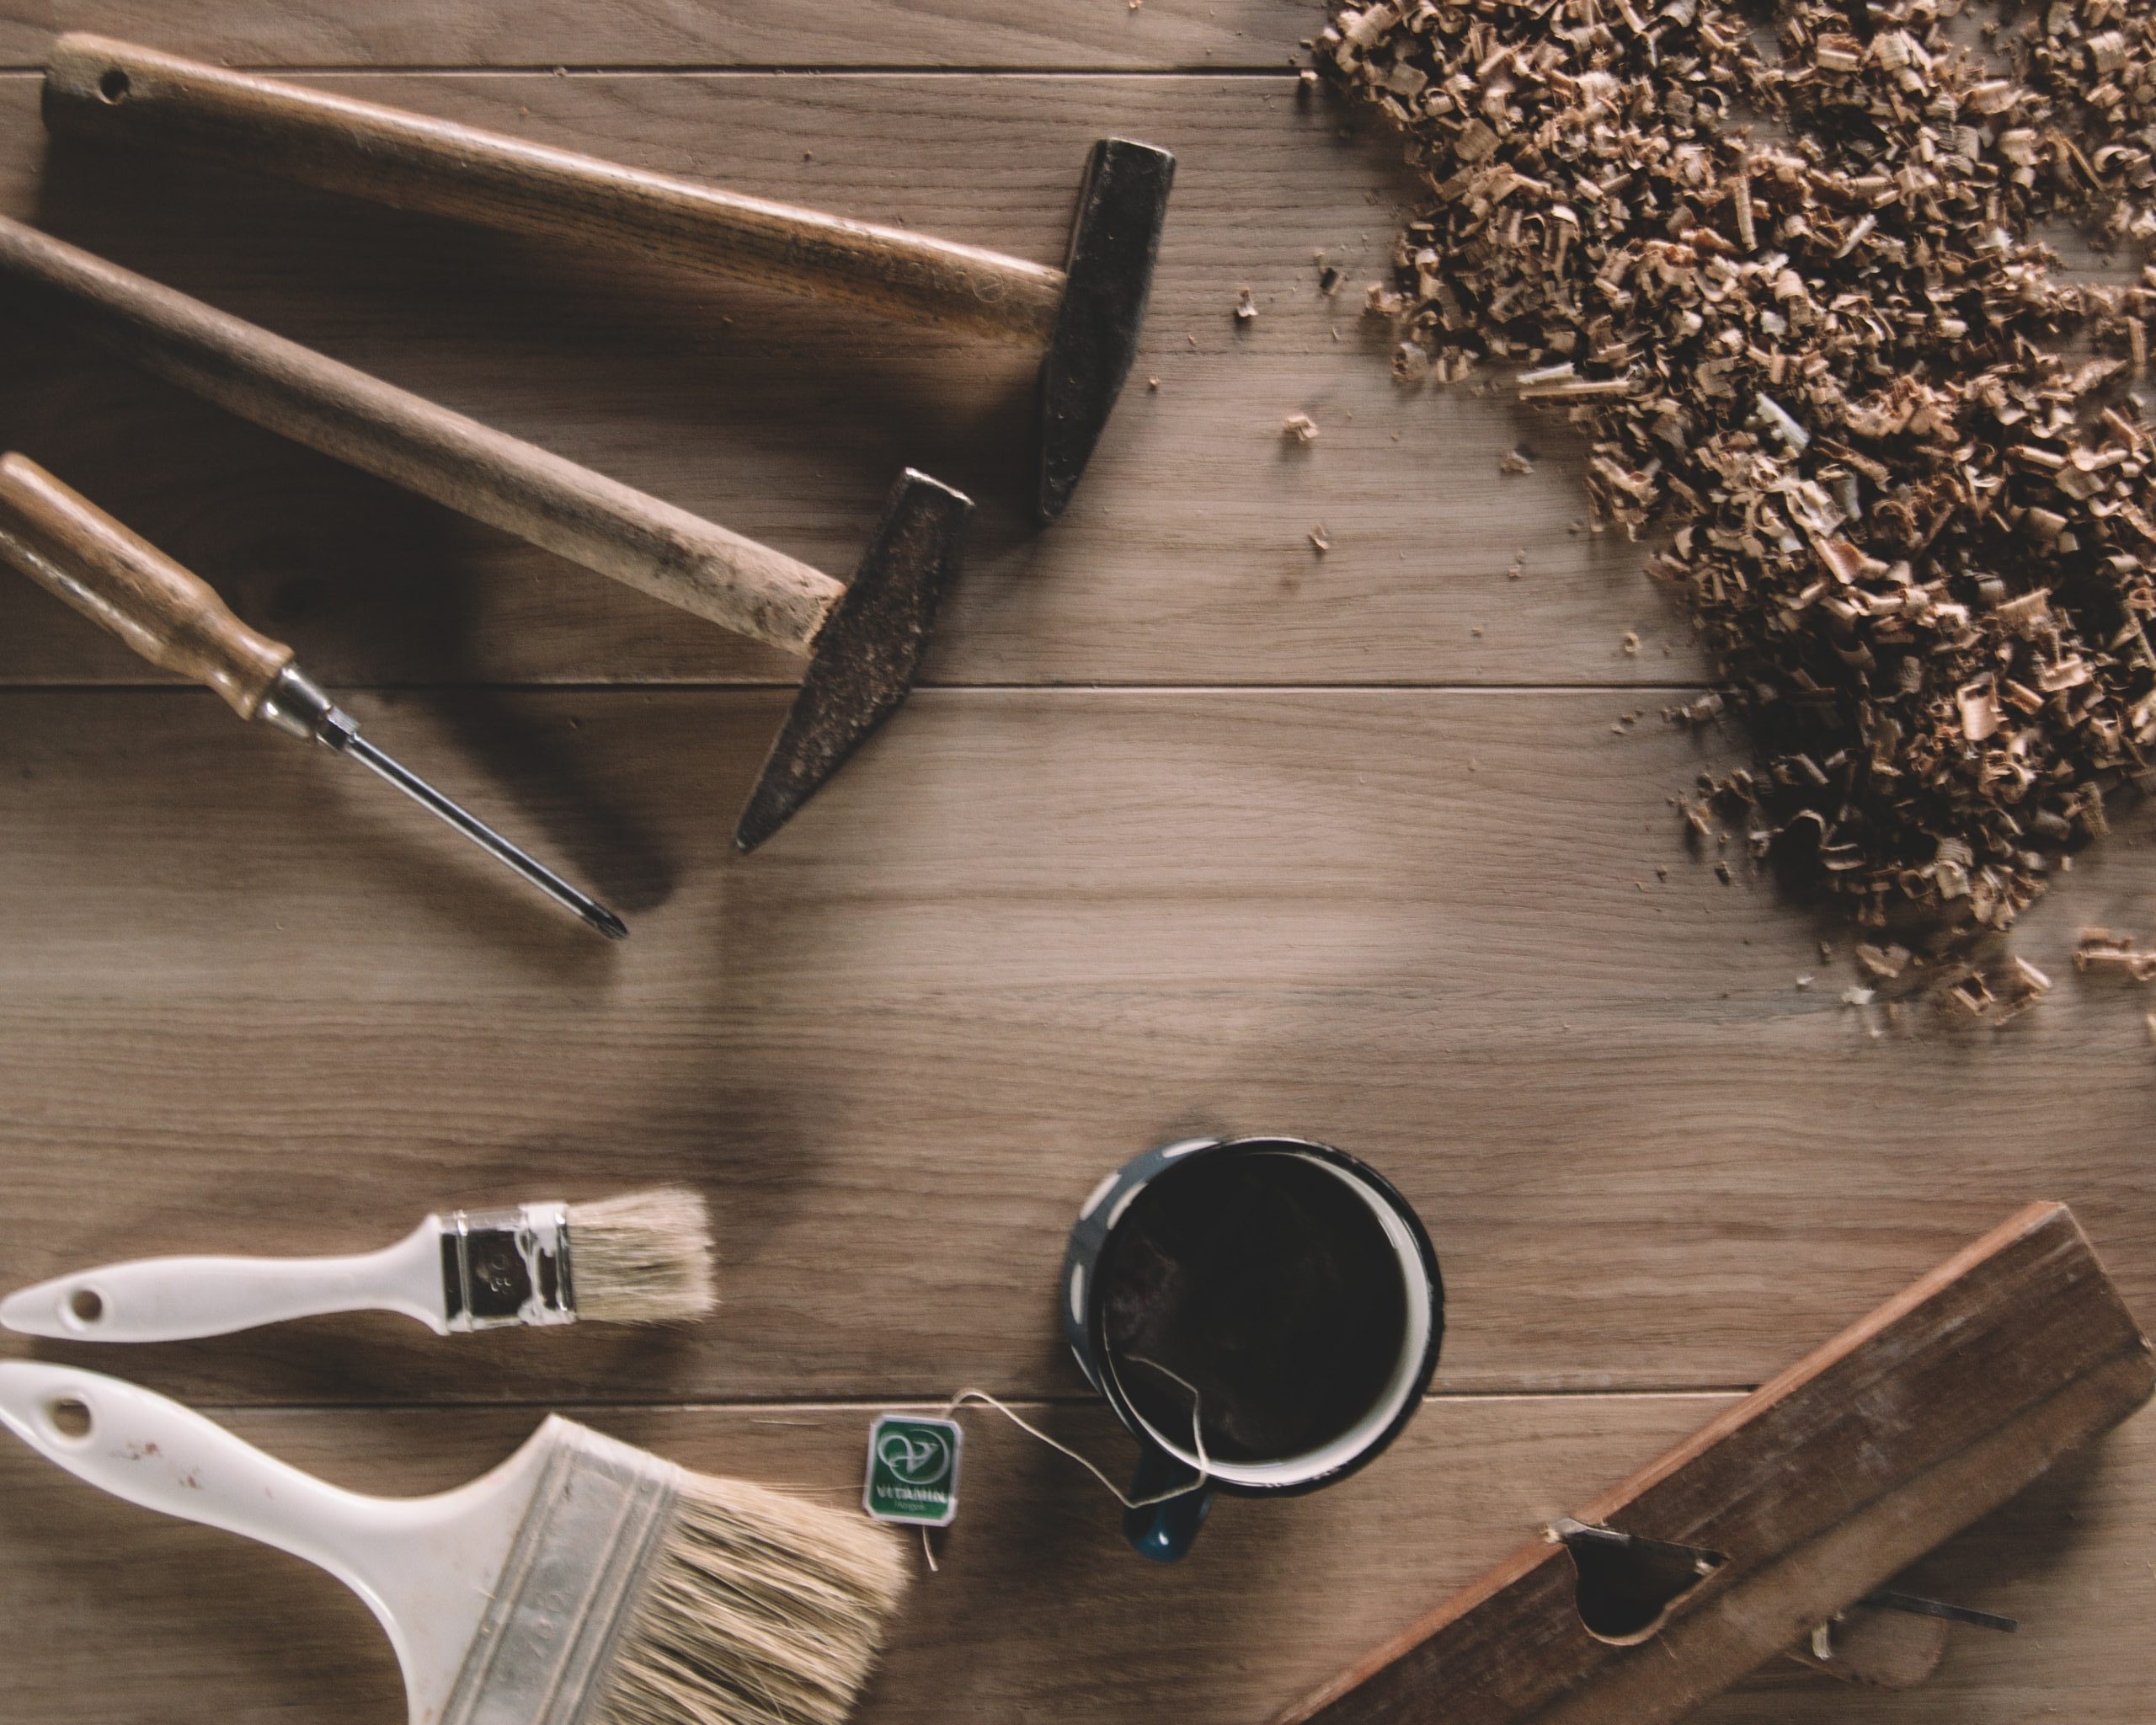 Tools, paintbrushes and wood shavings are arranged on a wooden table. There is a cup of tea next to the tools.